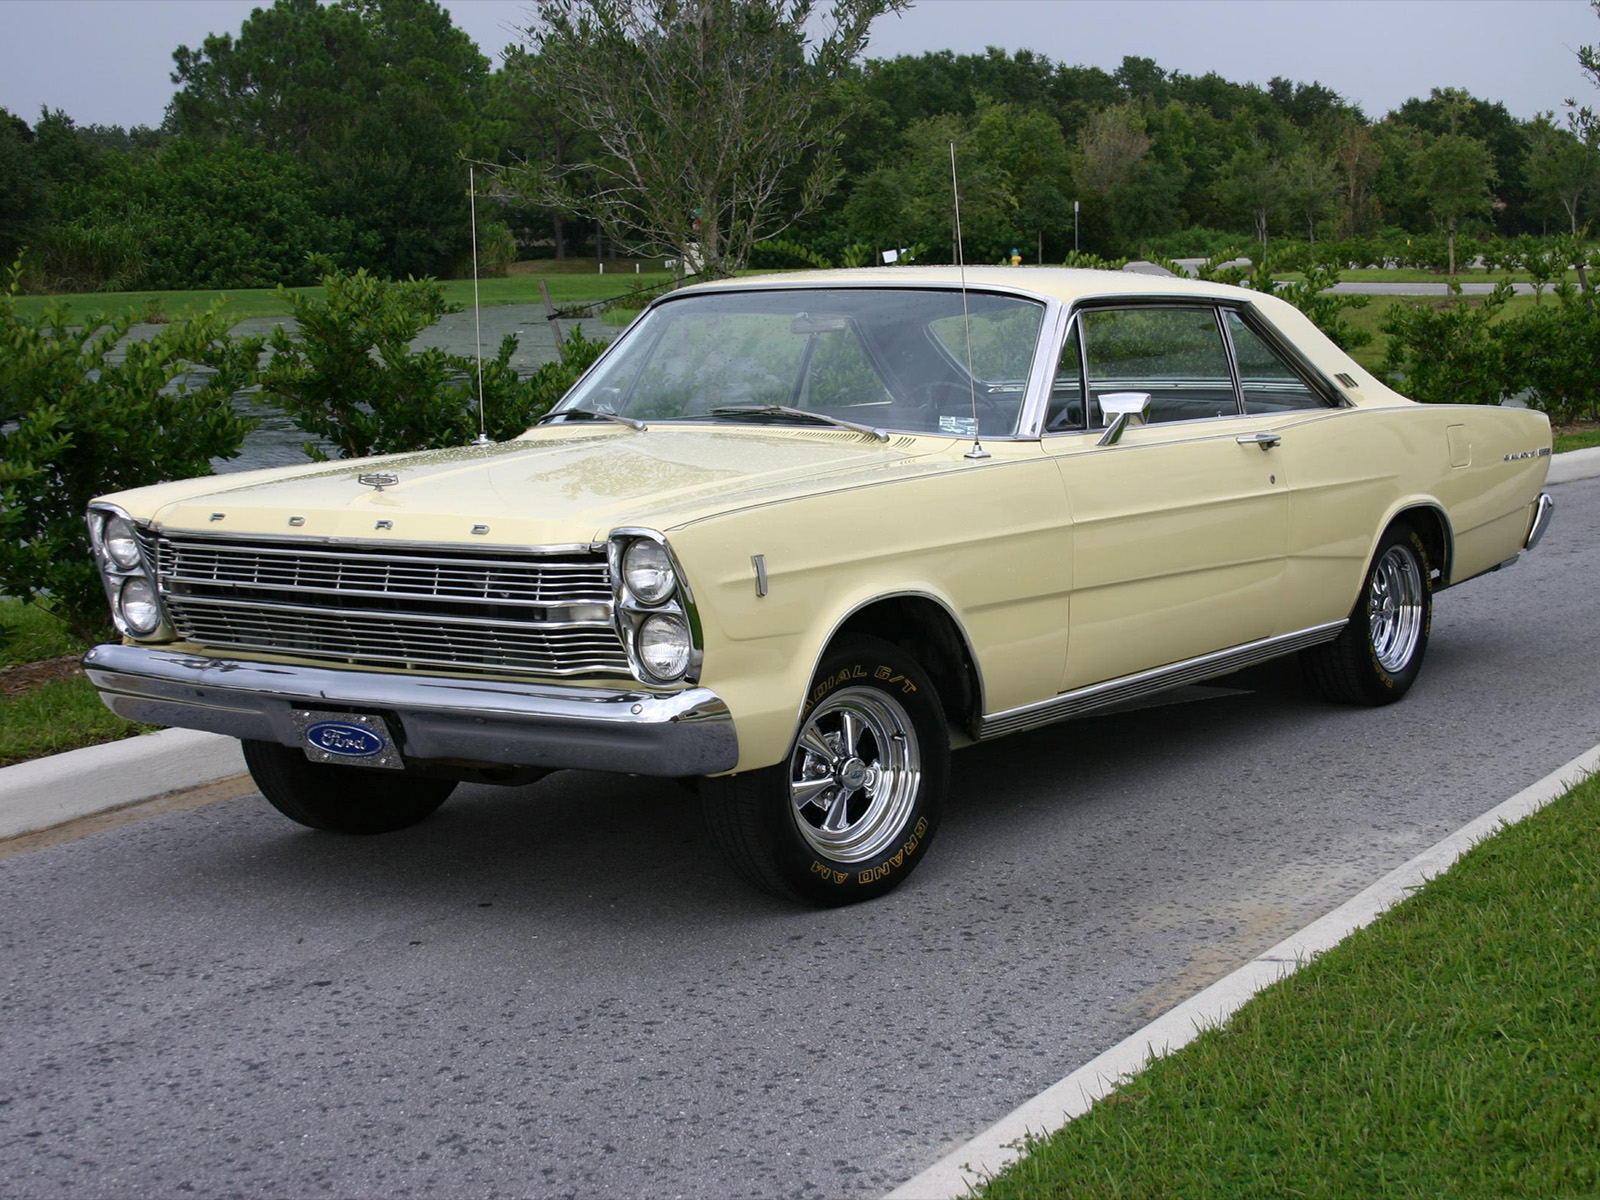 HQ Ford Galaxie Wallpapers | File 624.51Kb